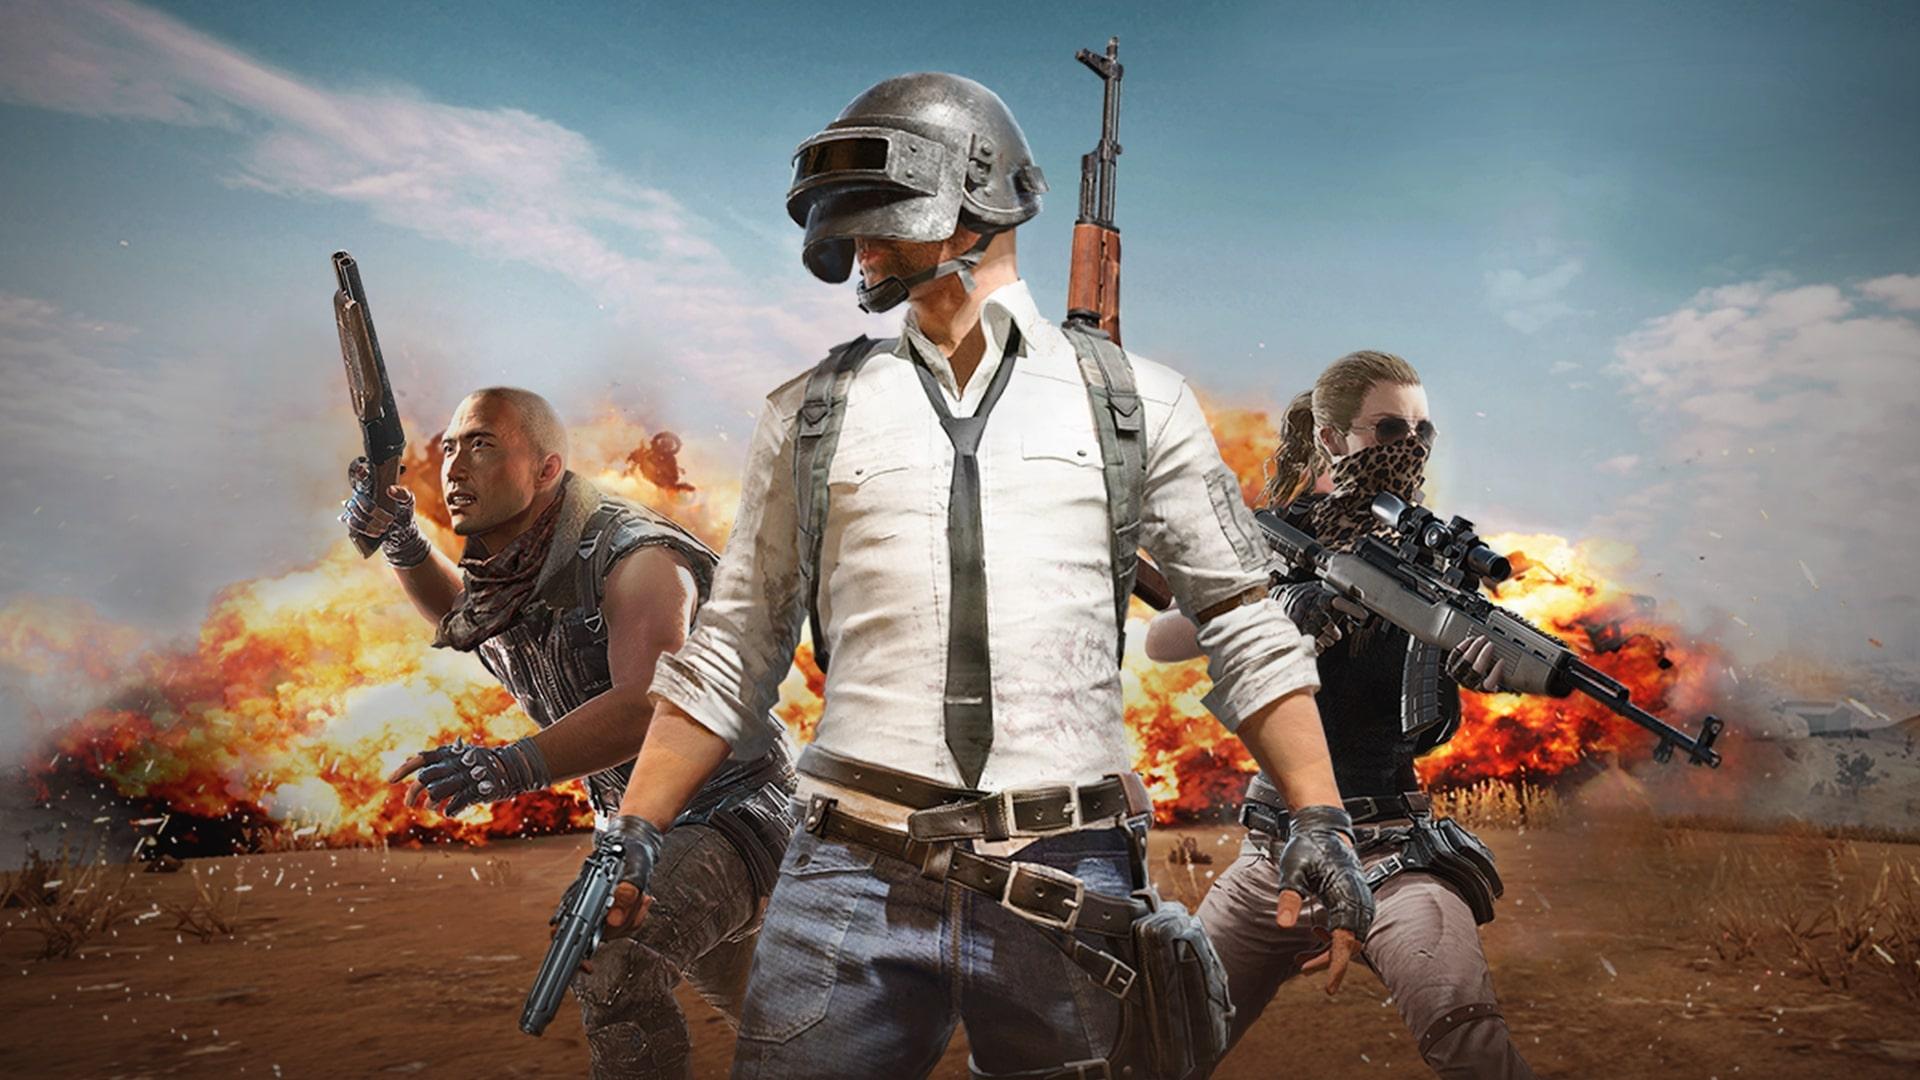 PUBG Cross Platform Play Between XB1 and PS4 Announced, Here's